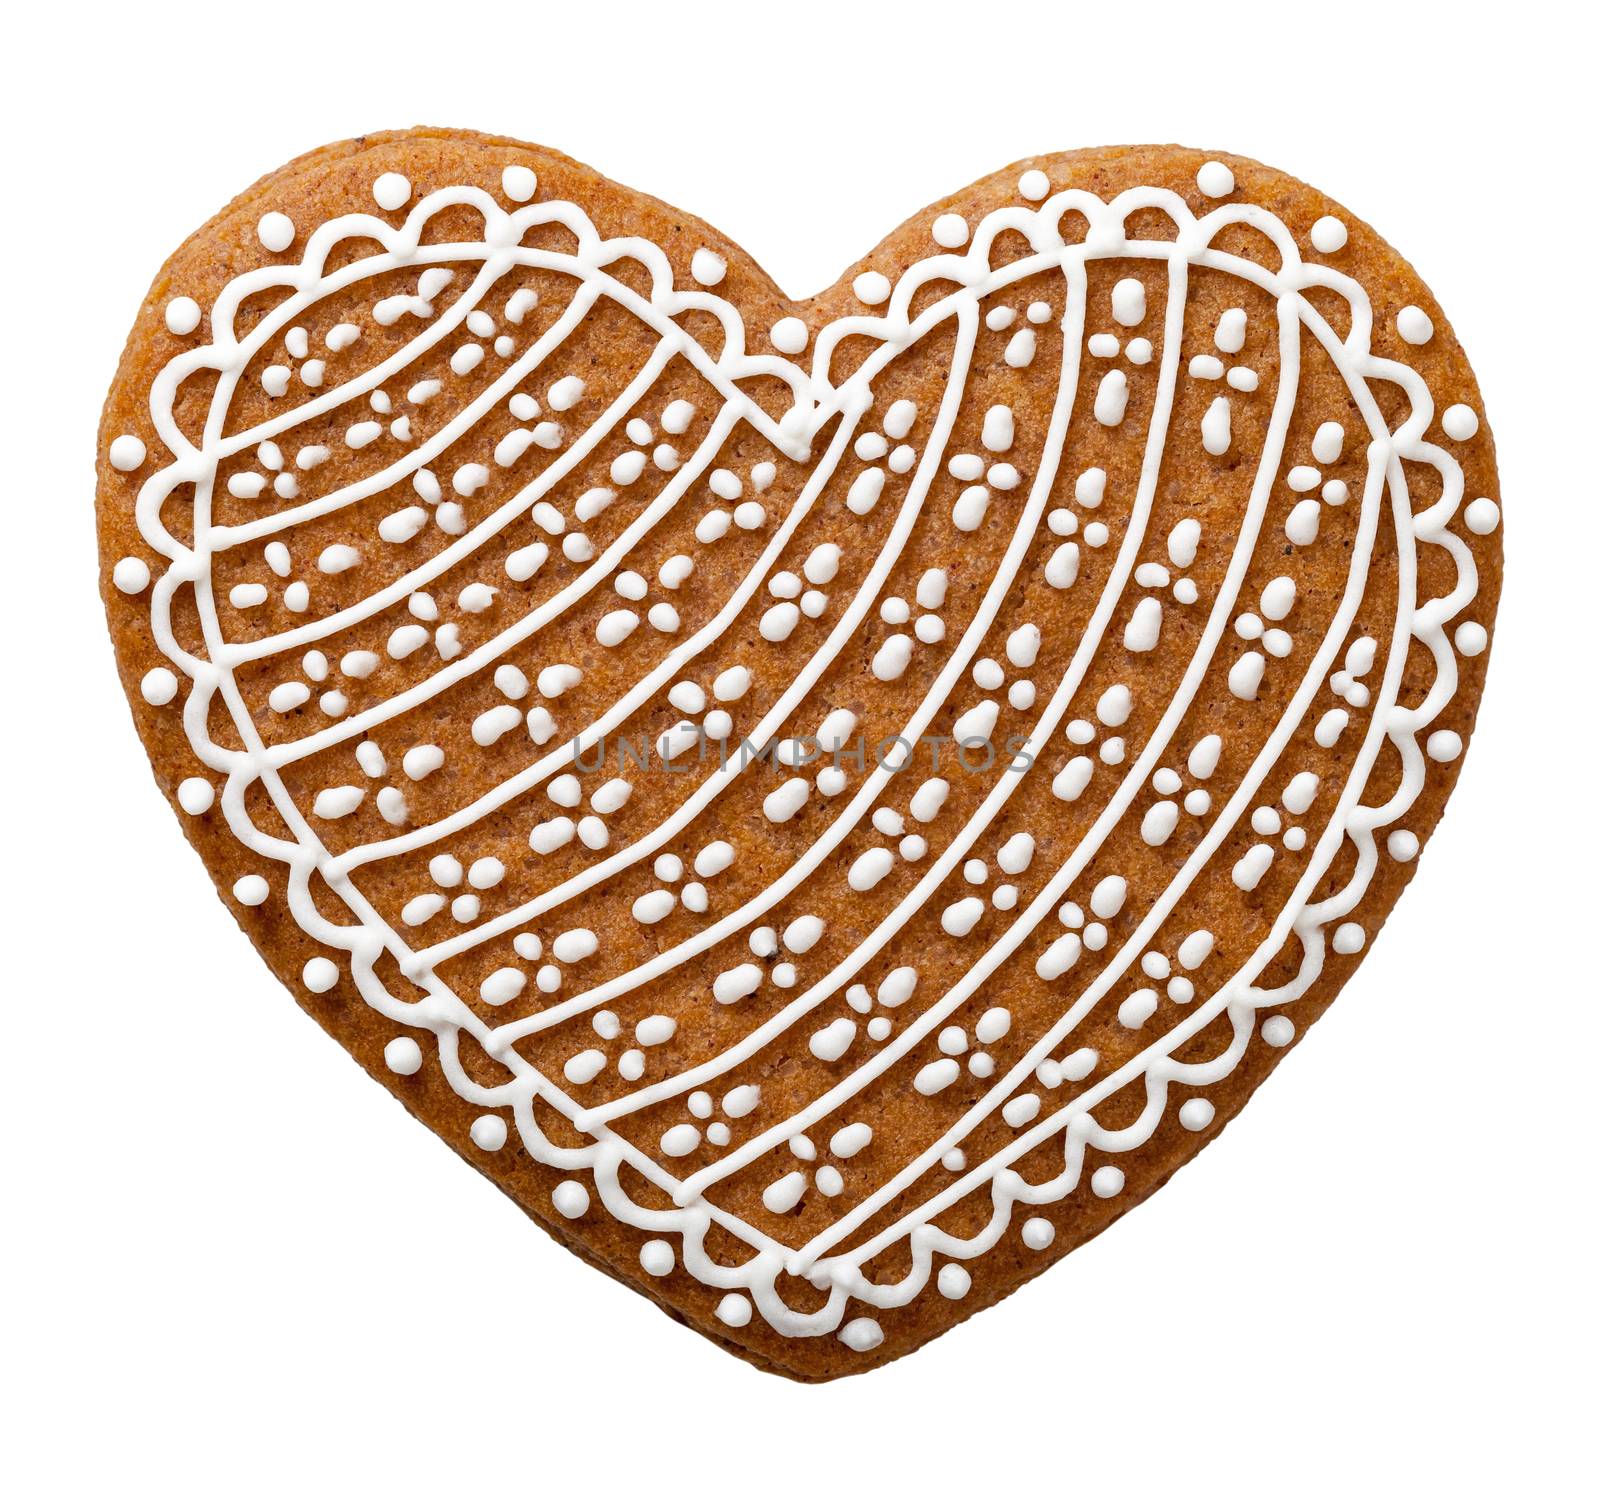 Gingerbread heart cookie for Christmas isolated on white background